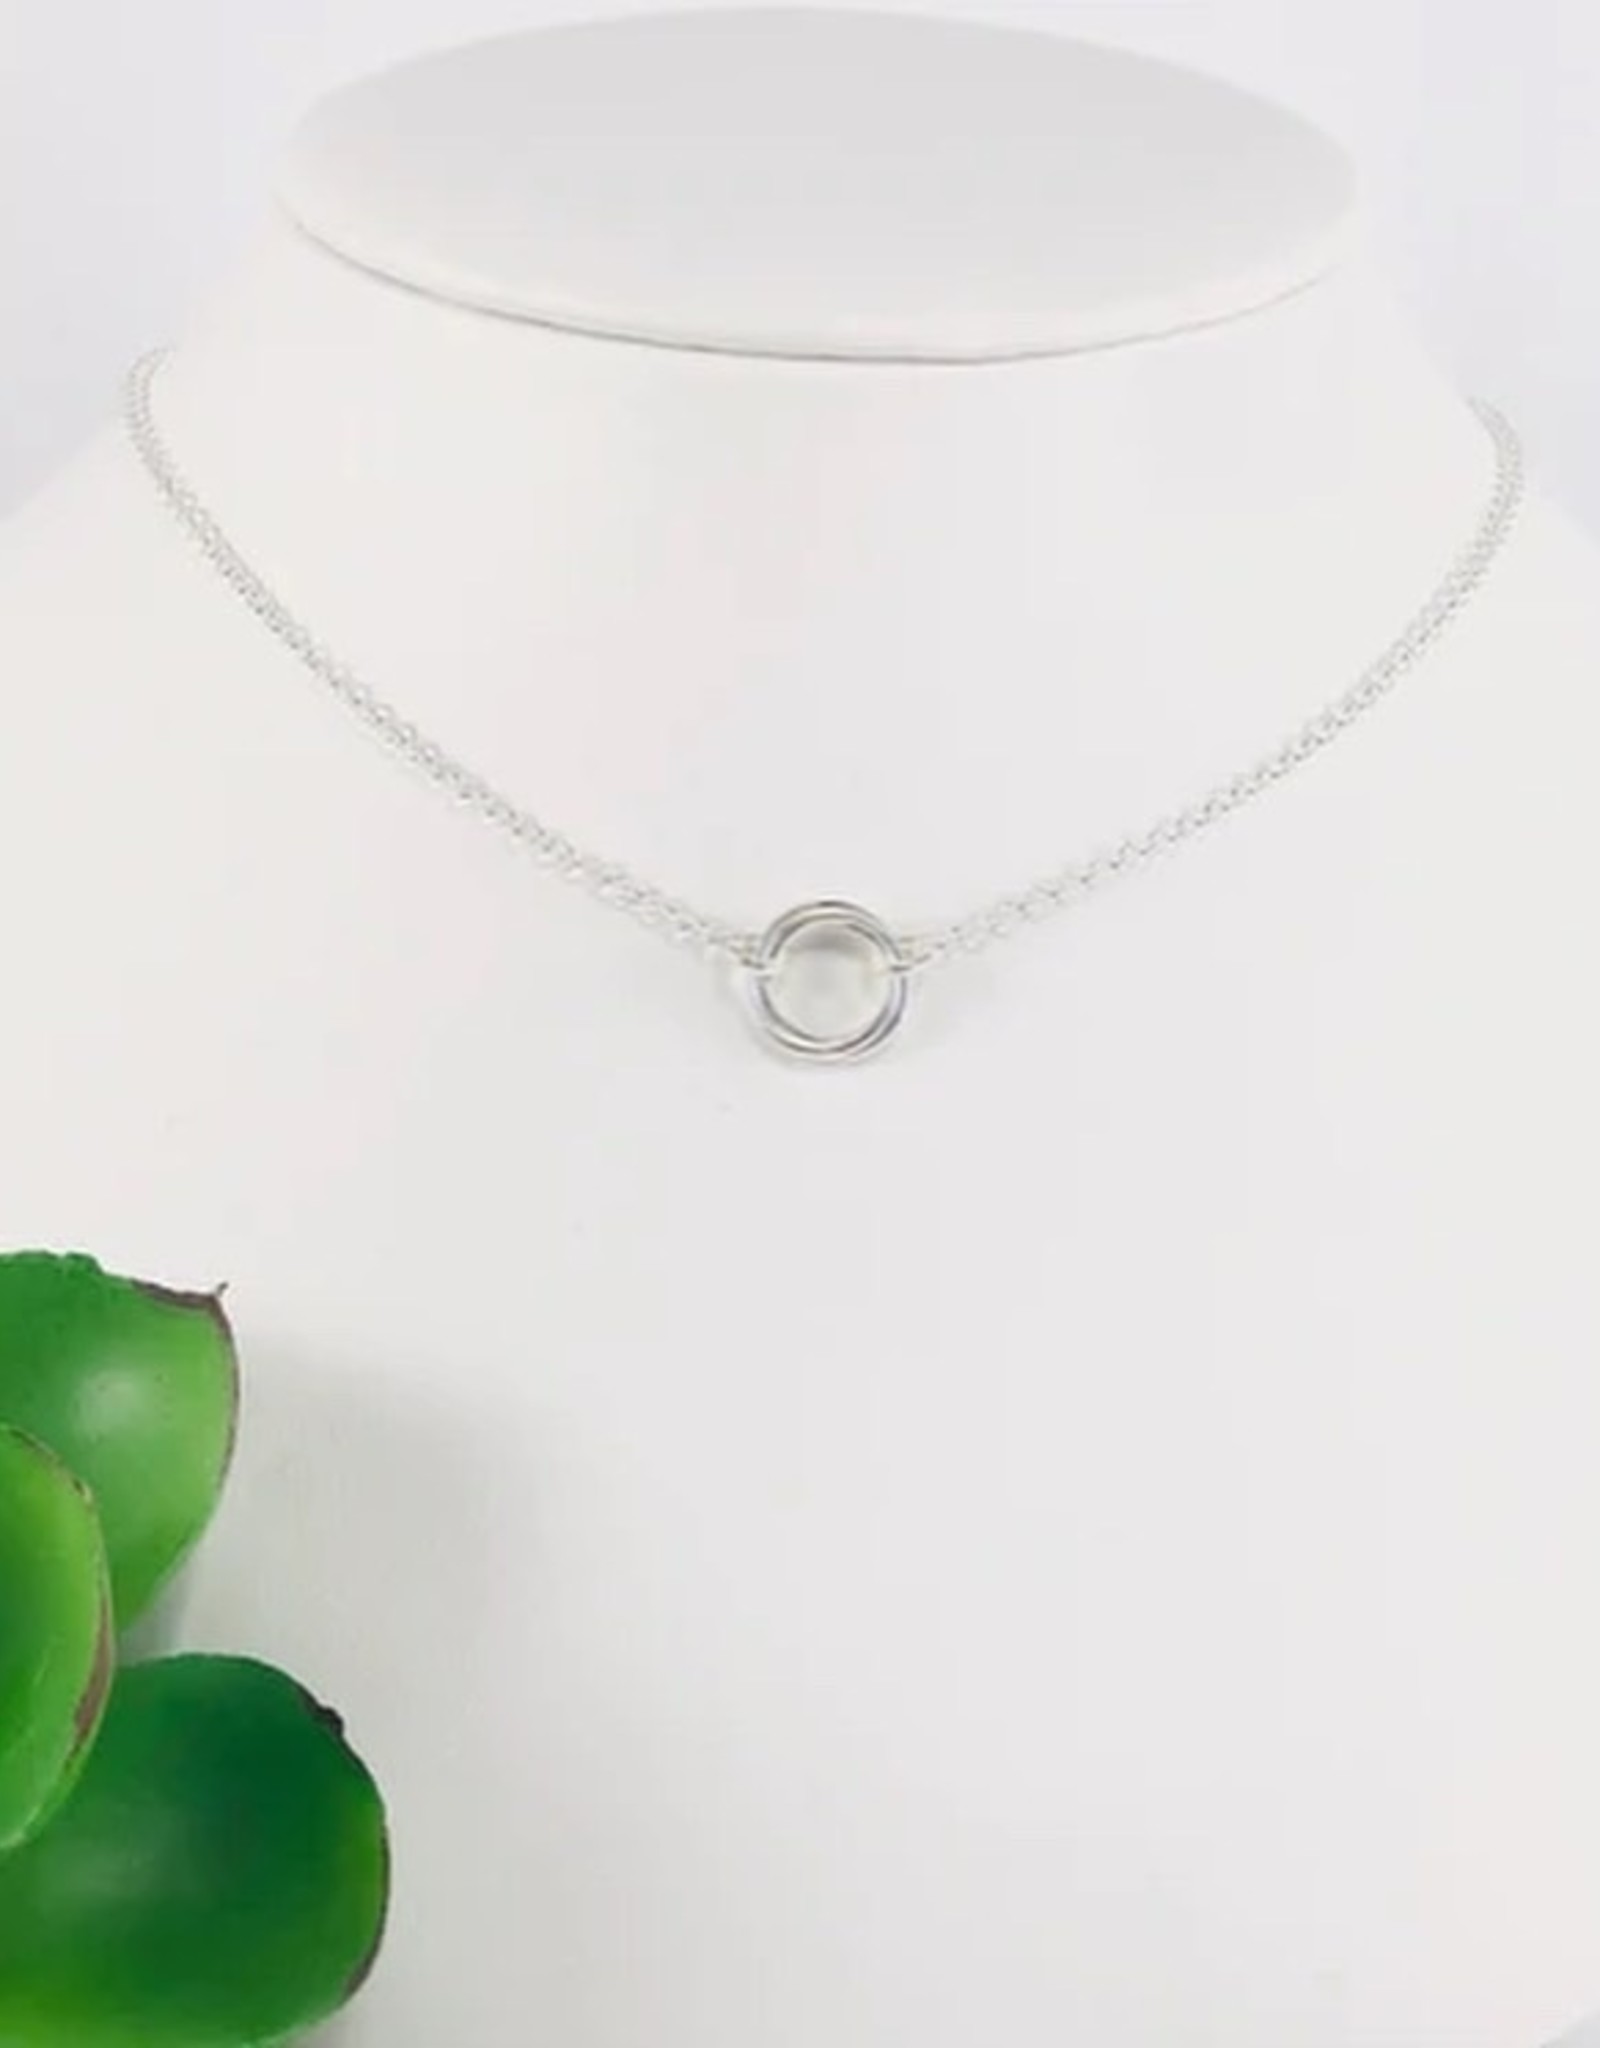 Shy Giraffe SG1367 Entwined Circles Sterling Silver Necklace